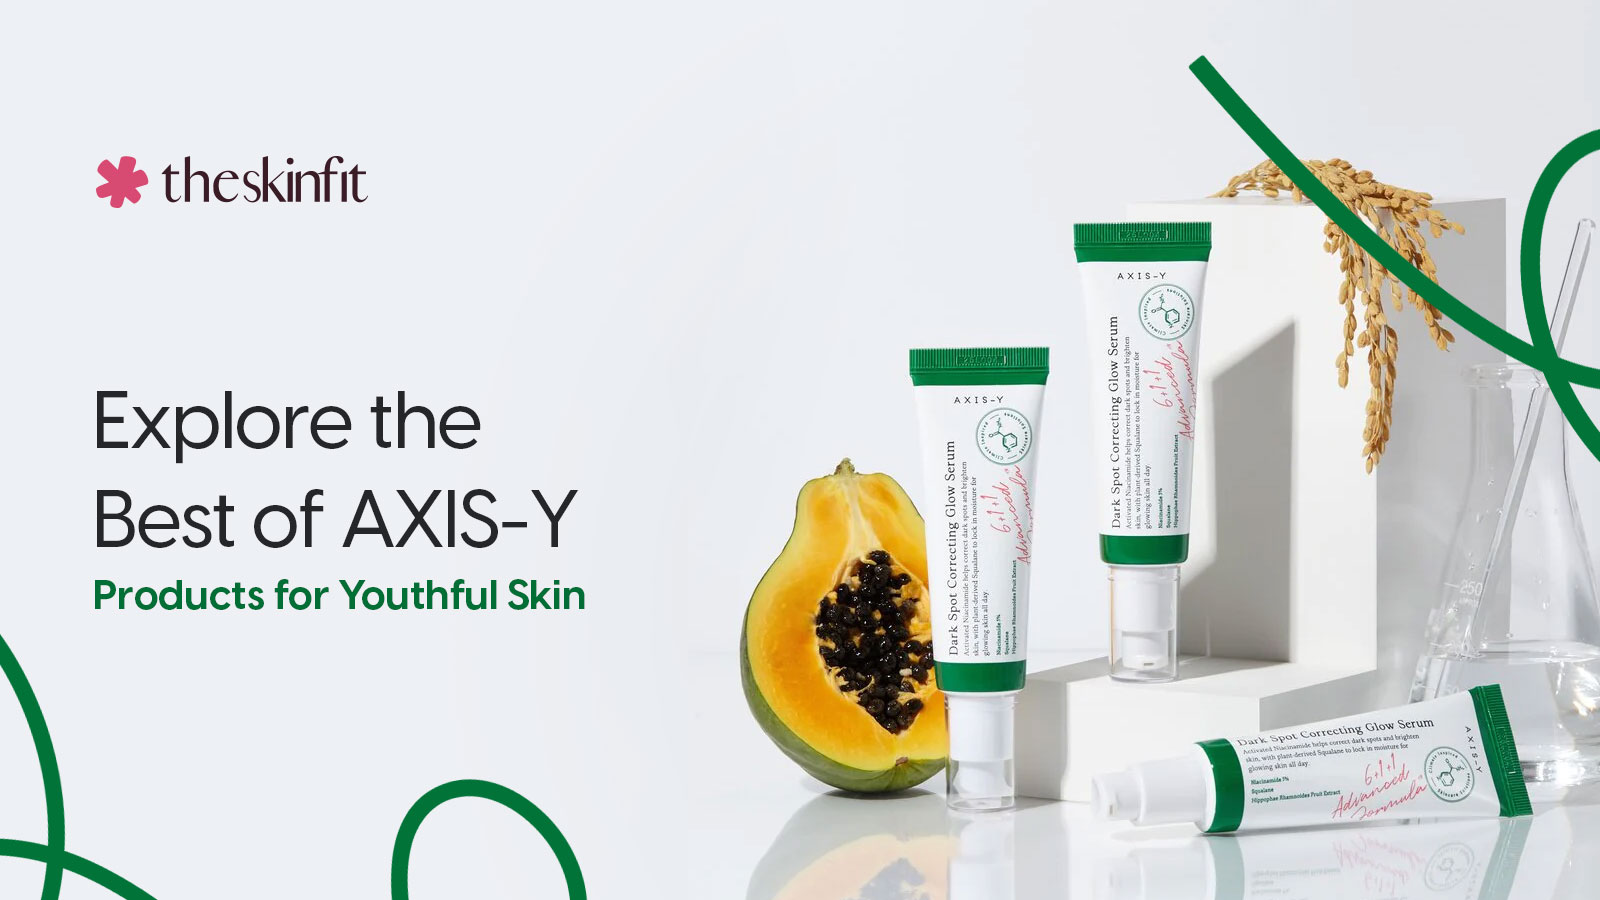 Explore the Best of AXIS-Y Products for Youthful Skin